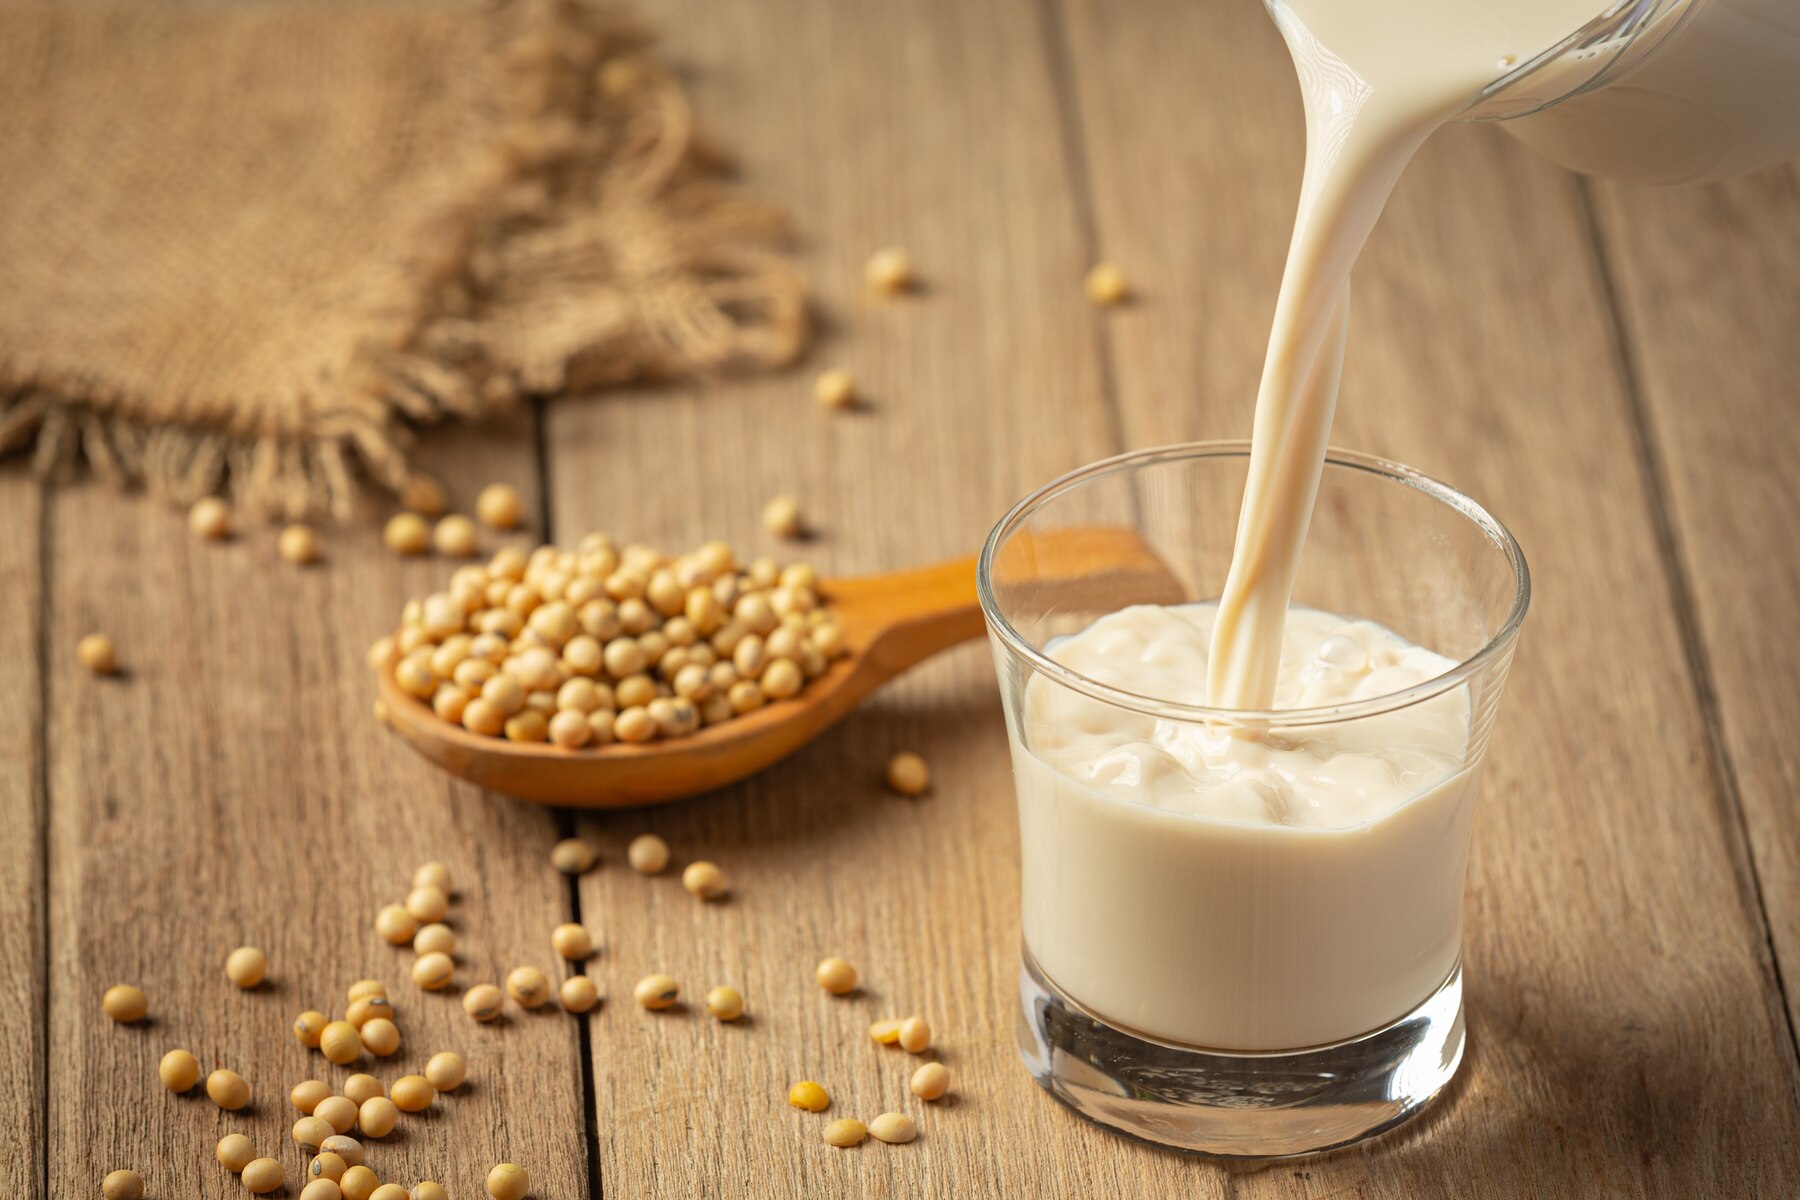 soy-milk-soy-food-and-beverage-products-food-nutrition-concept_1150-26335.jpg